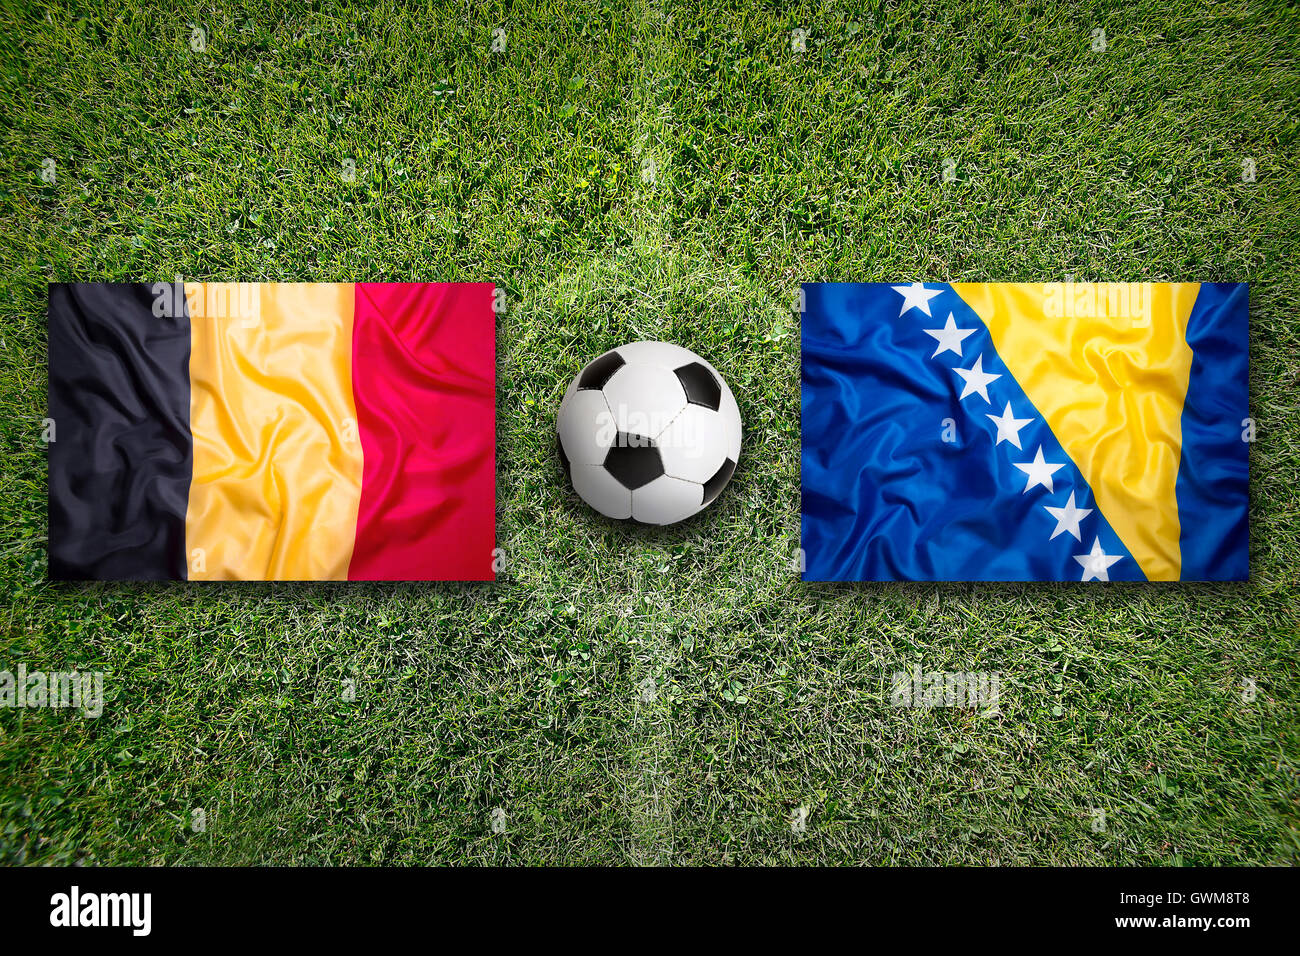 Belgium and Bosnia and Herzegovina flags on a green soccer field Stock Photo